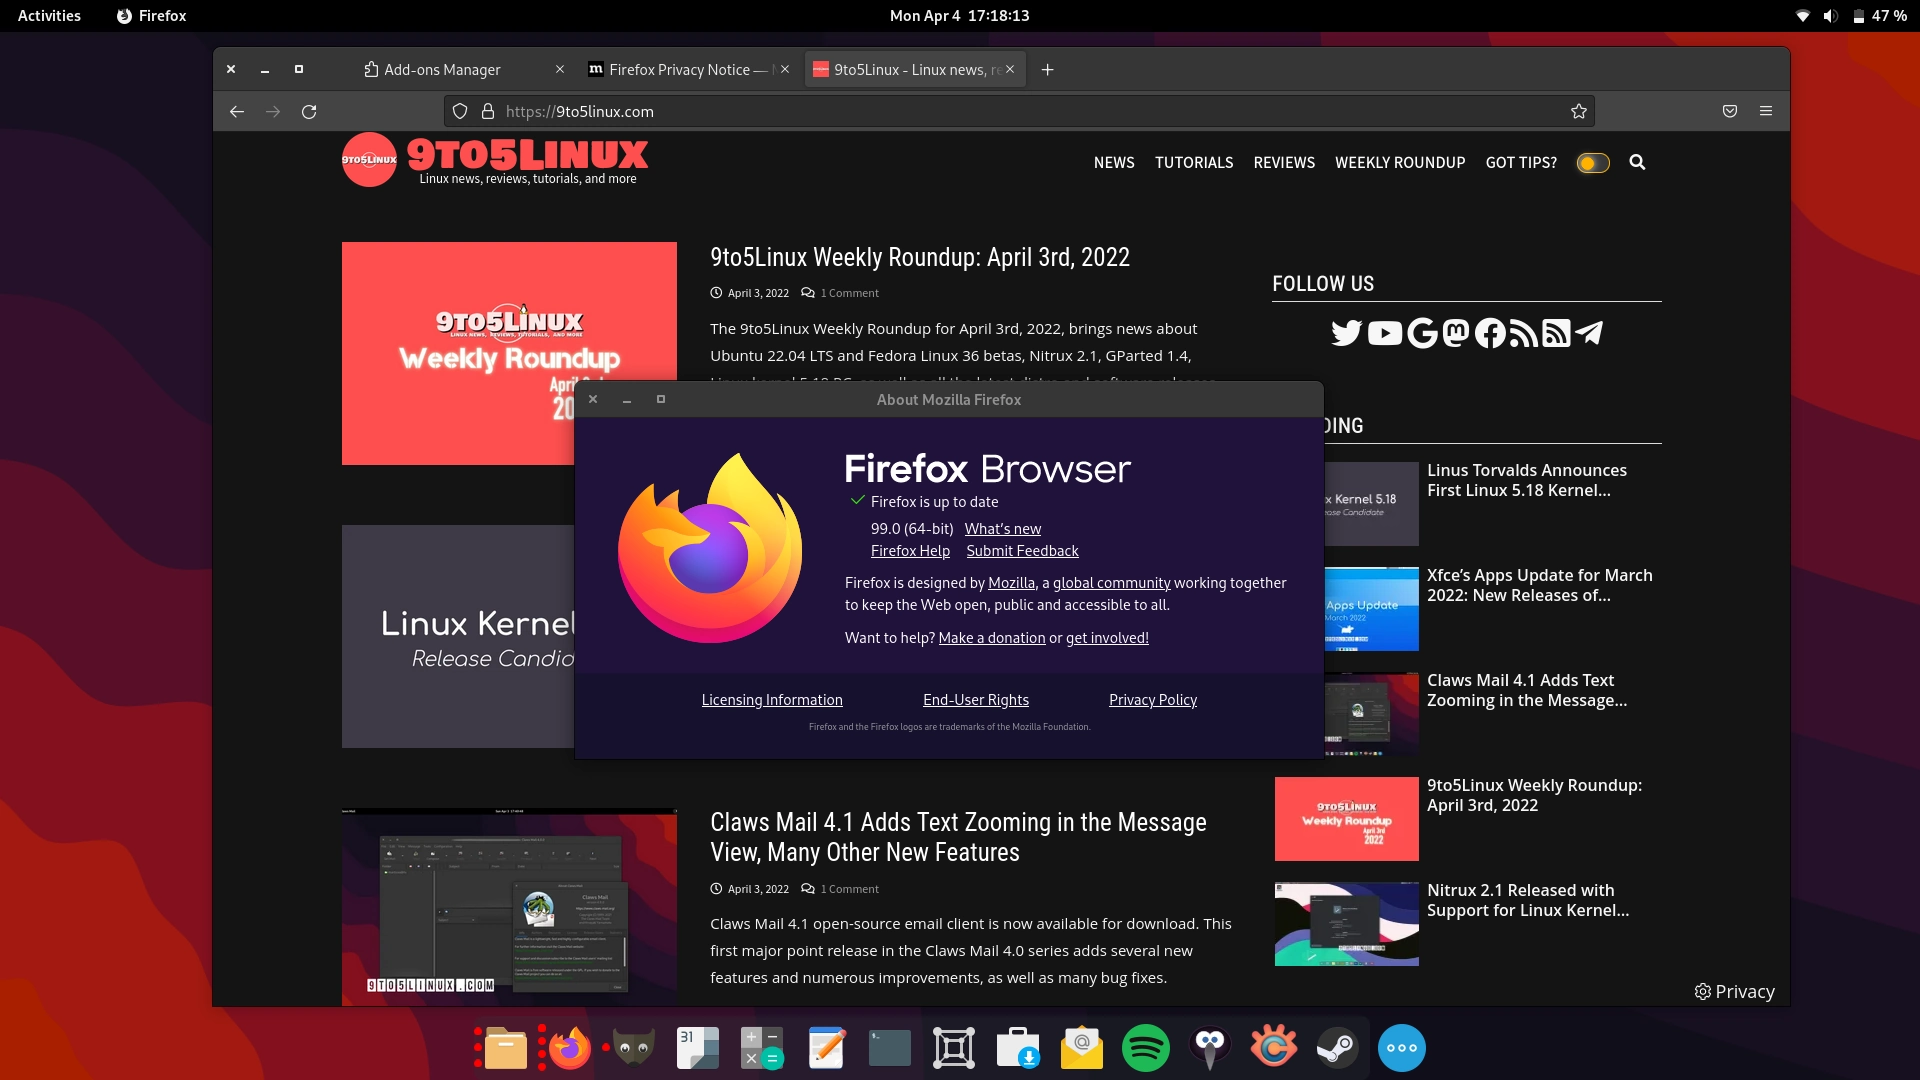 Mozilla Firefox 99 Is Now Available for Download with GTK Overlay Scrollbars